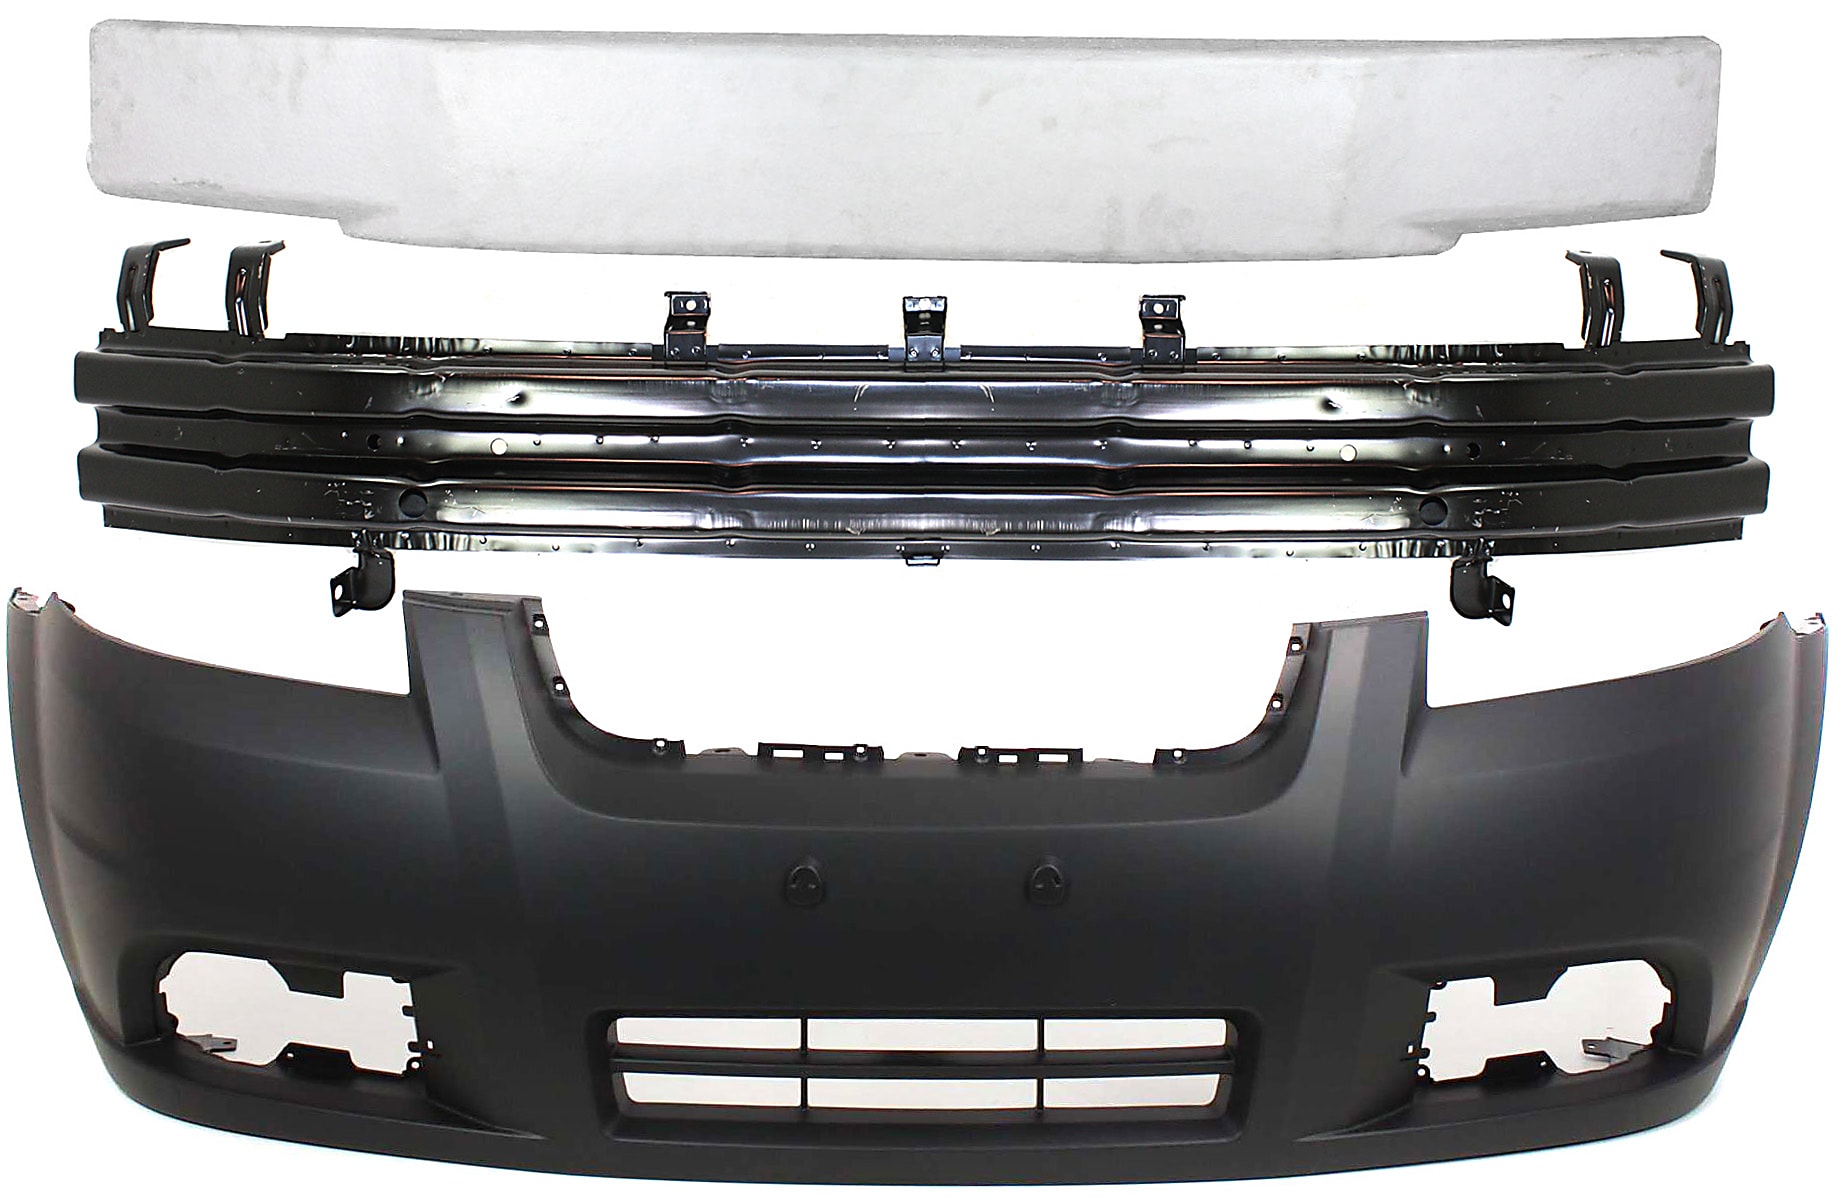 Bumper Scratch Guard Protector fits for Chevrolet Aveo Hatchback 2008-2011 